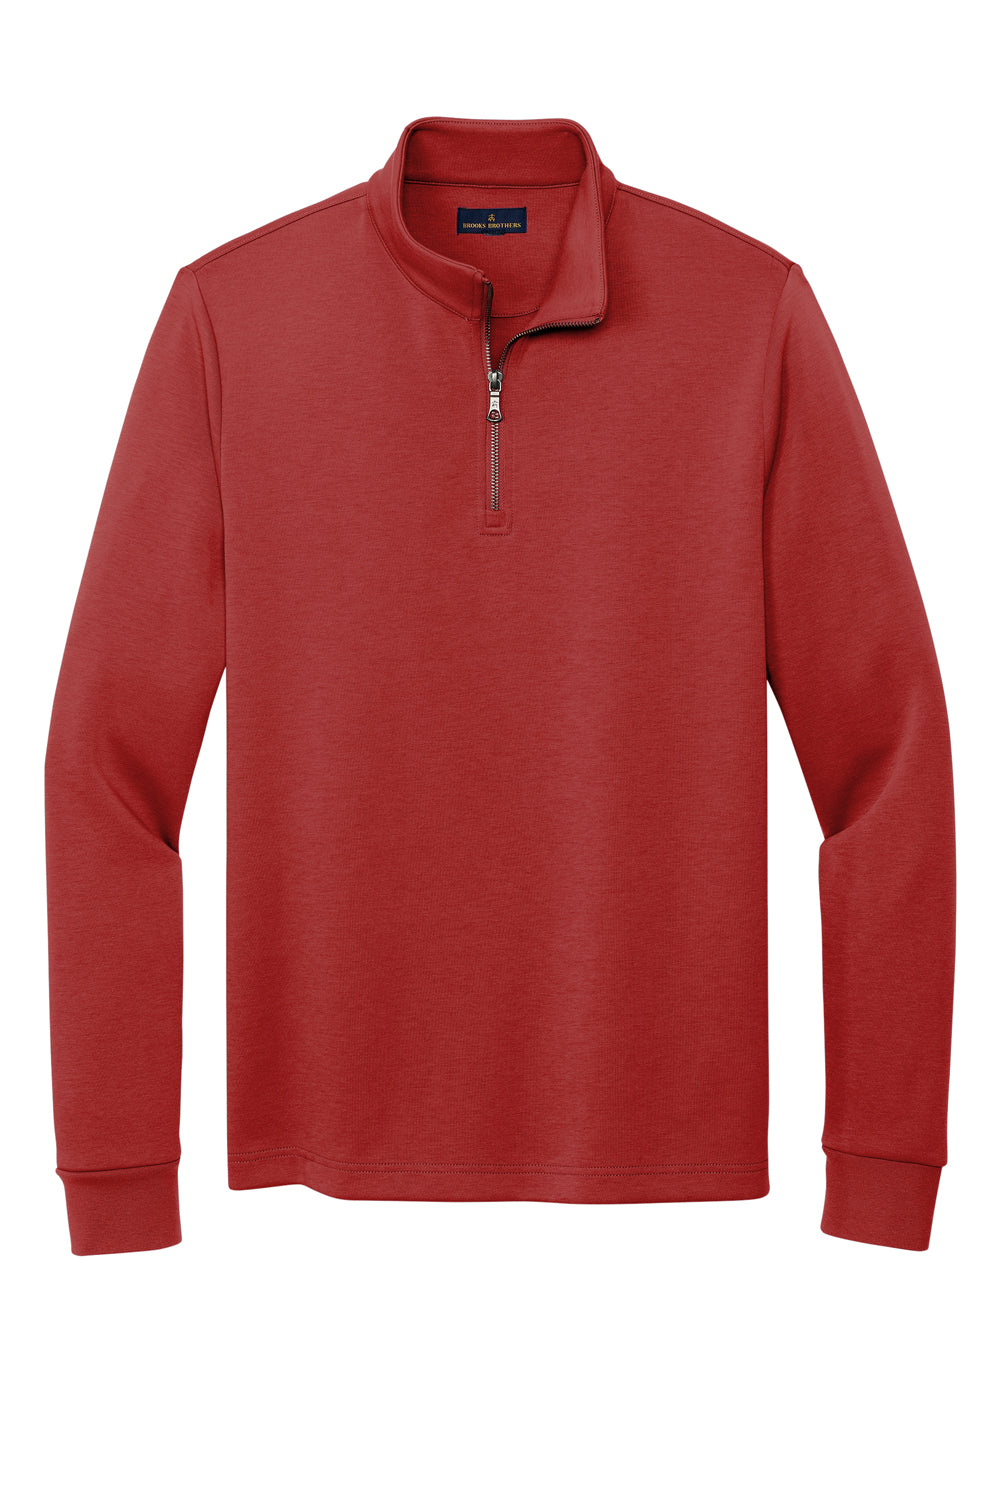 Brooks Brothers Mens Double Knit 1/4 Zip Sweatshirt Rich Red Flat Front